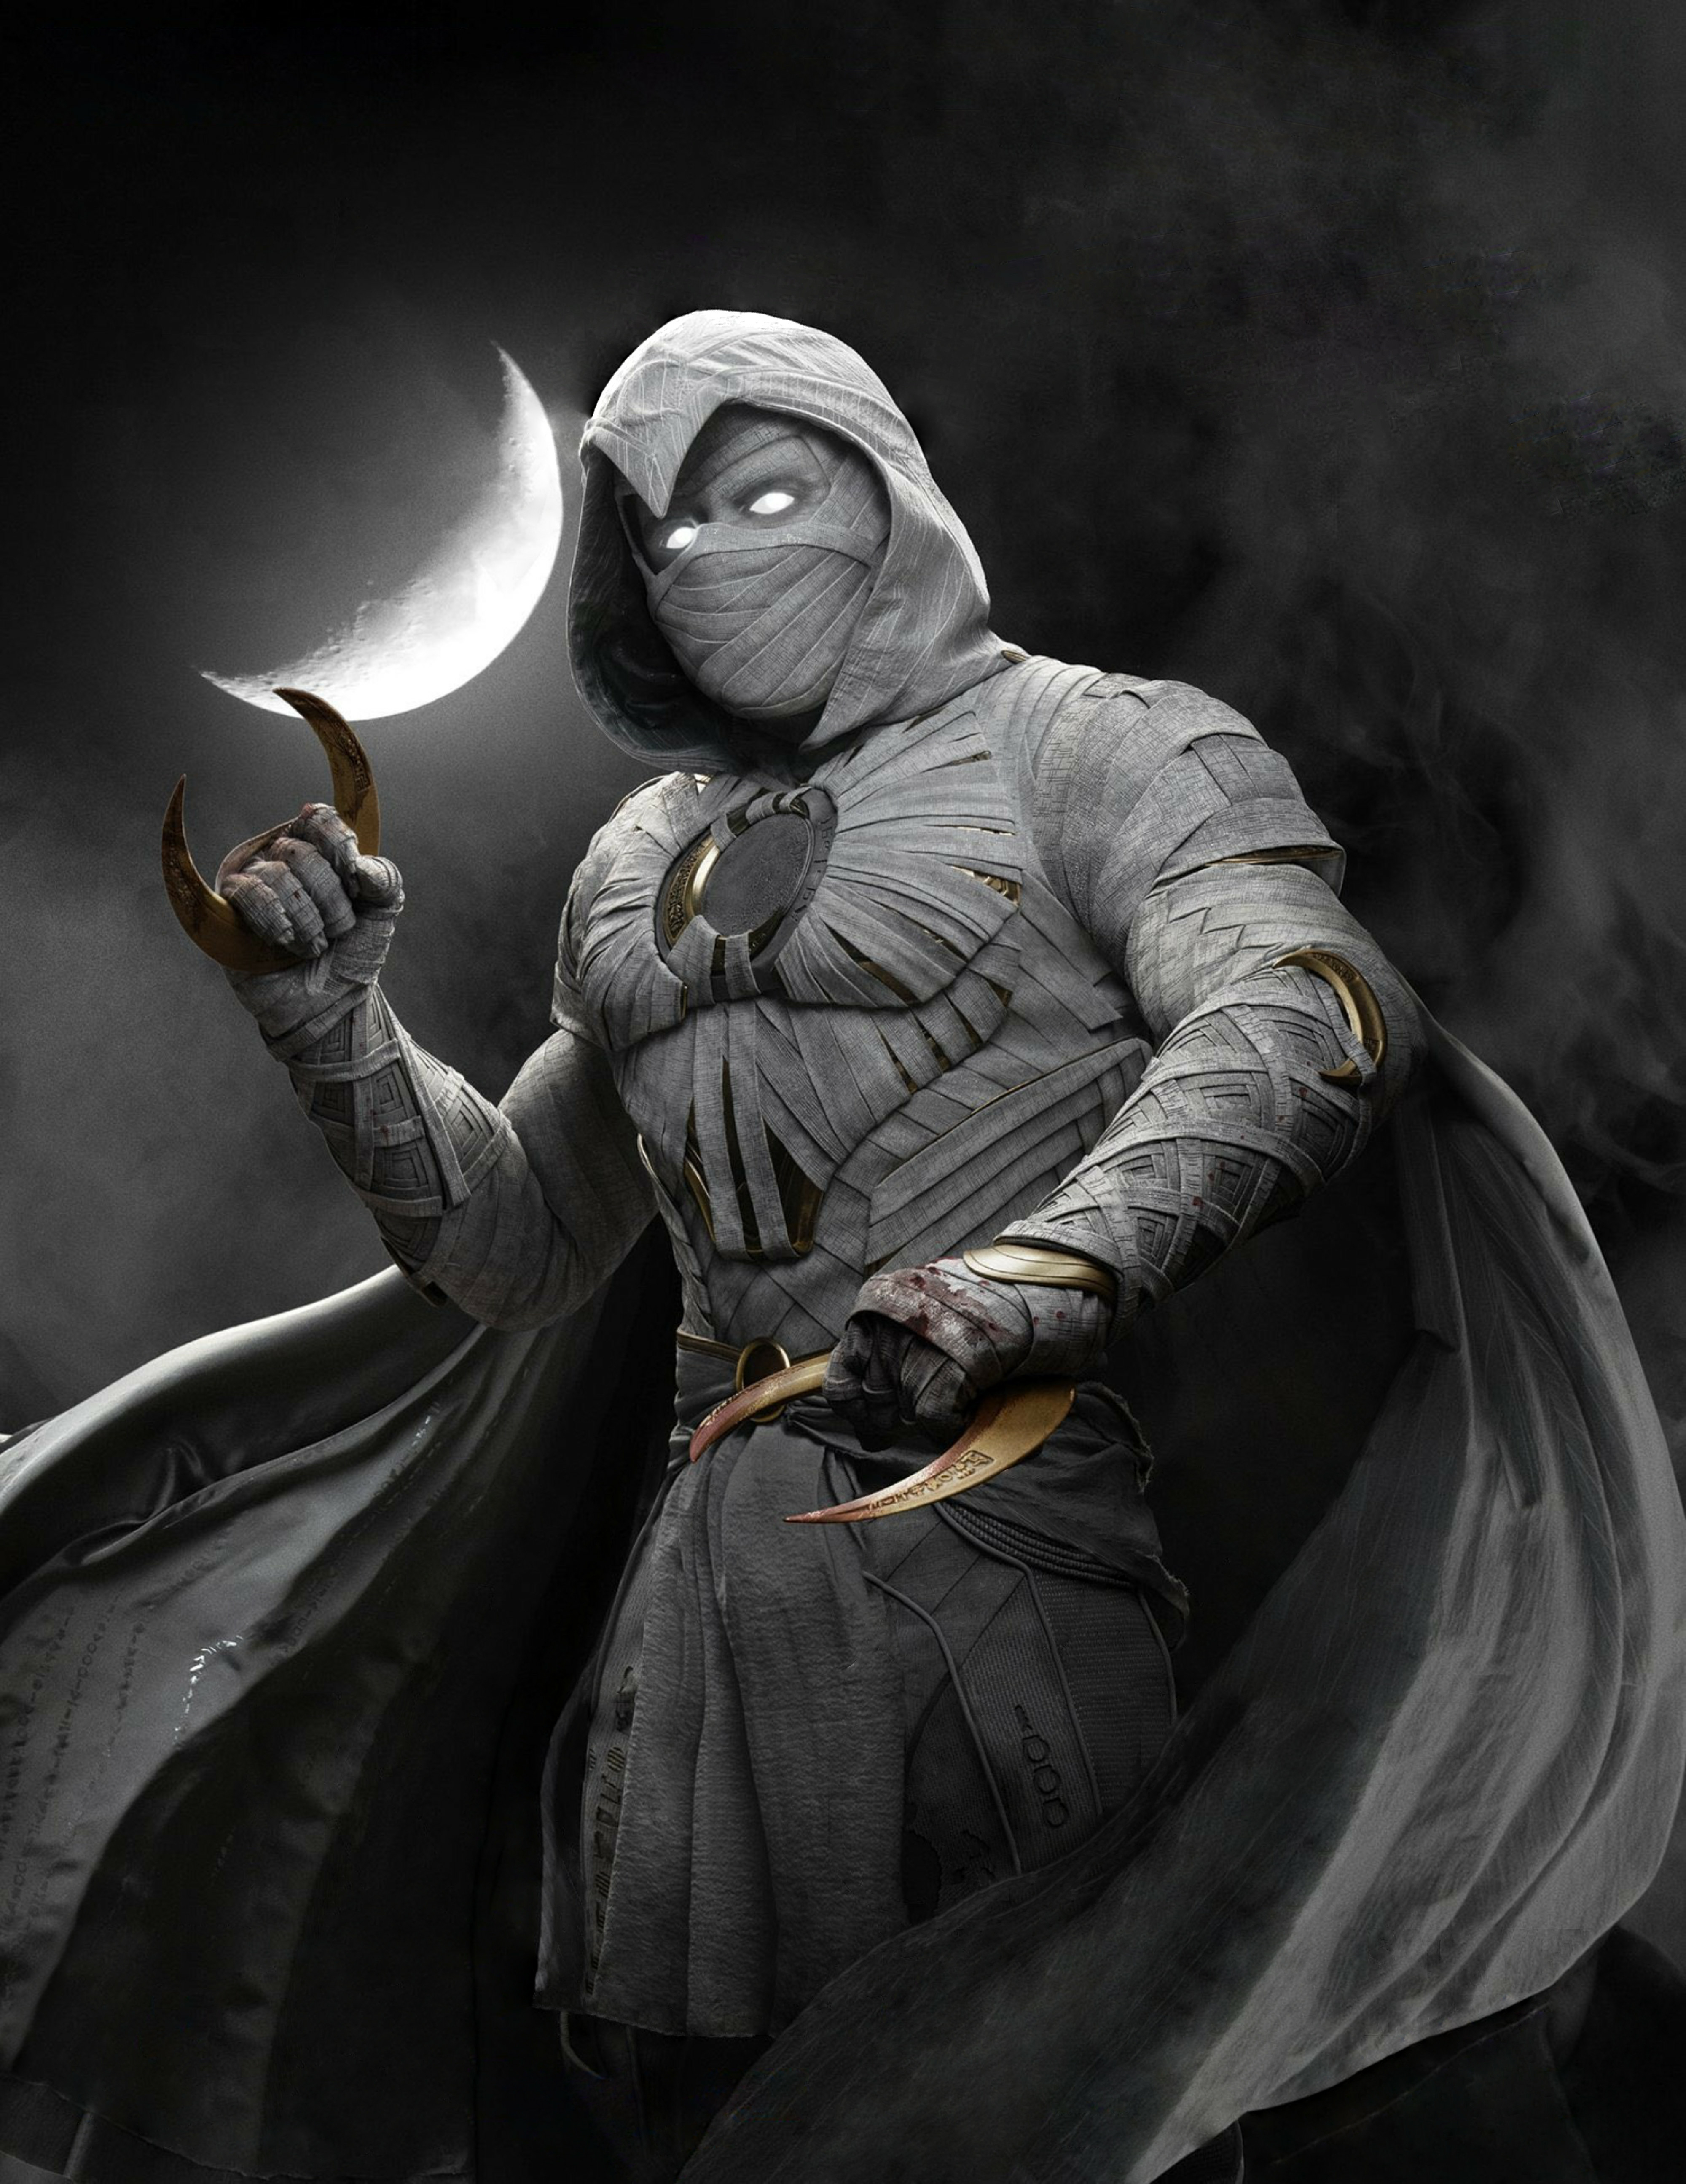 1080x230020 Marvel's Moon Knight 4K 1080x230020 Resolution Wallpaper, HD TV  Series 4K Wallpapers, Images, Photos and Background - Wallpapers Den